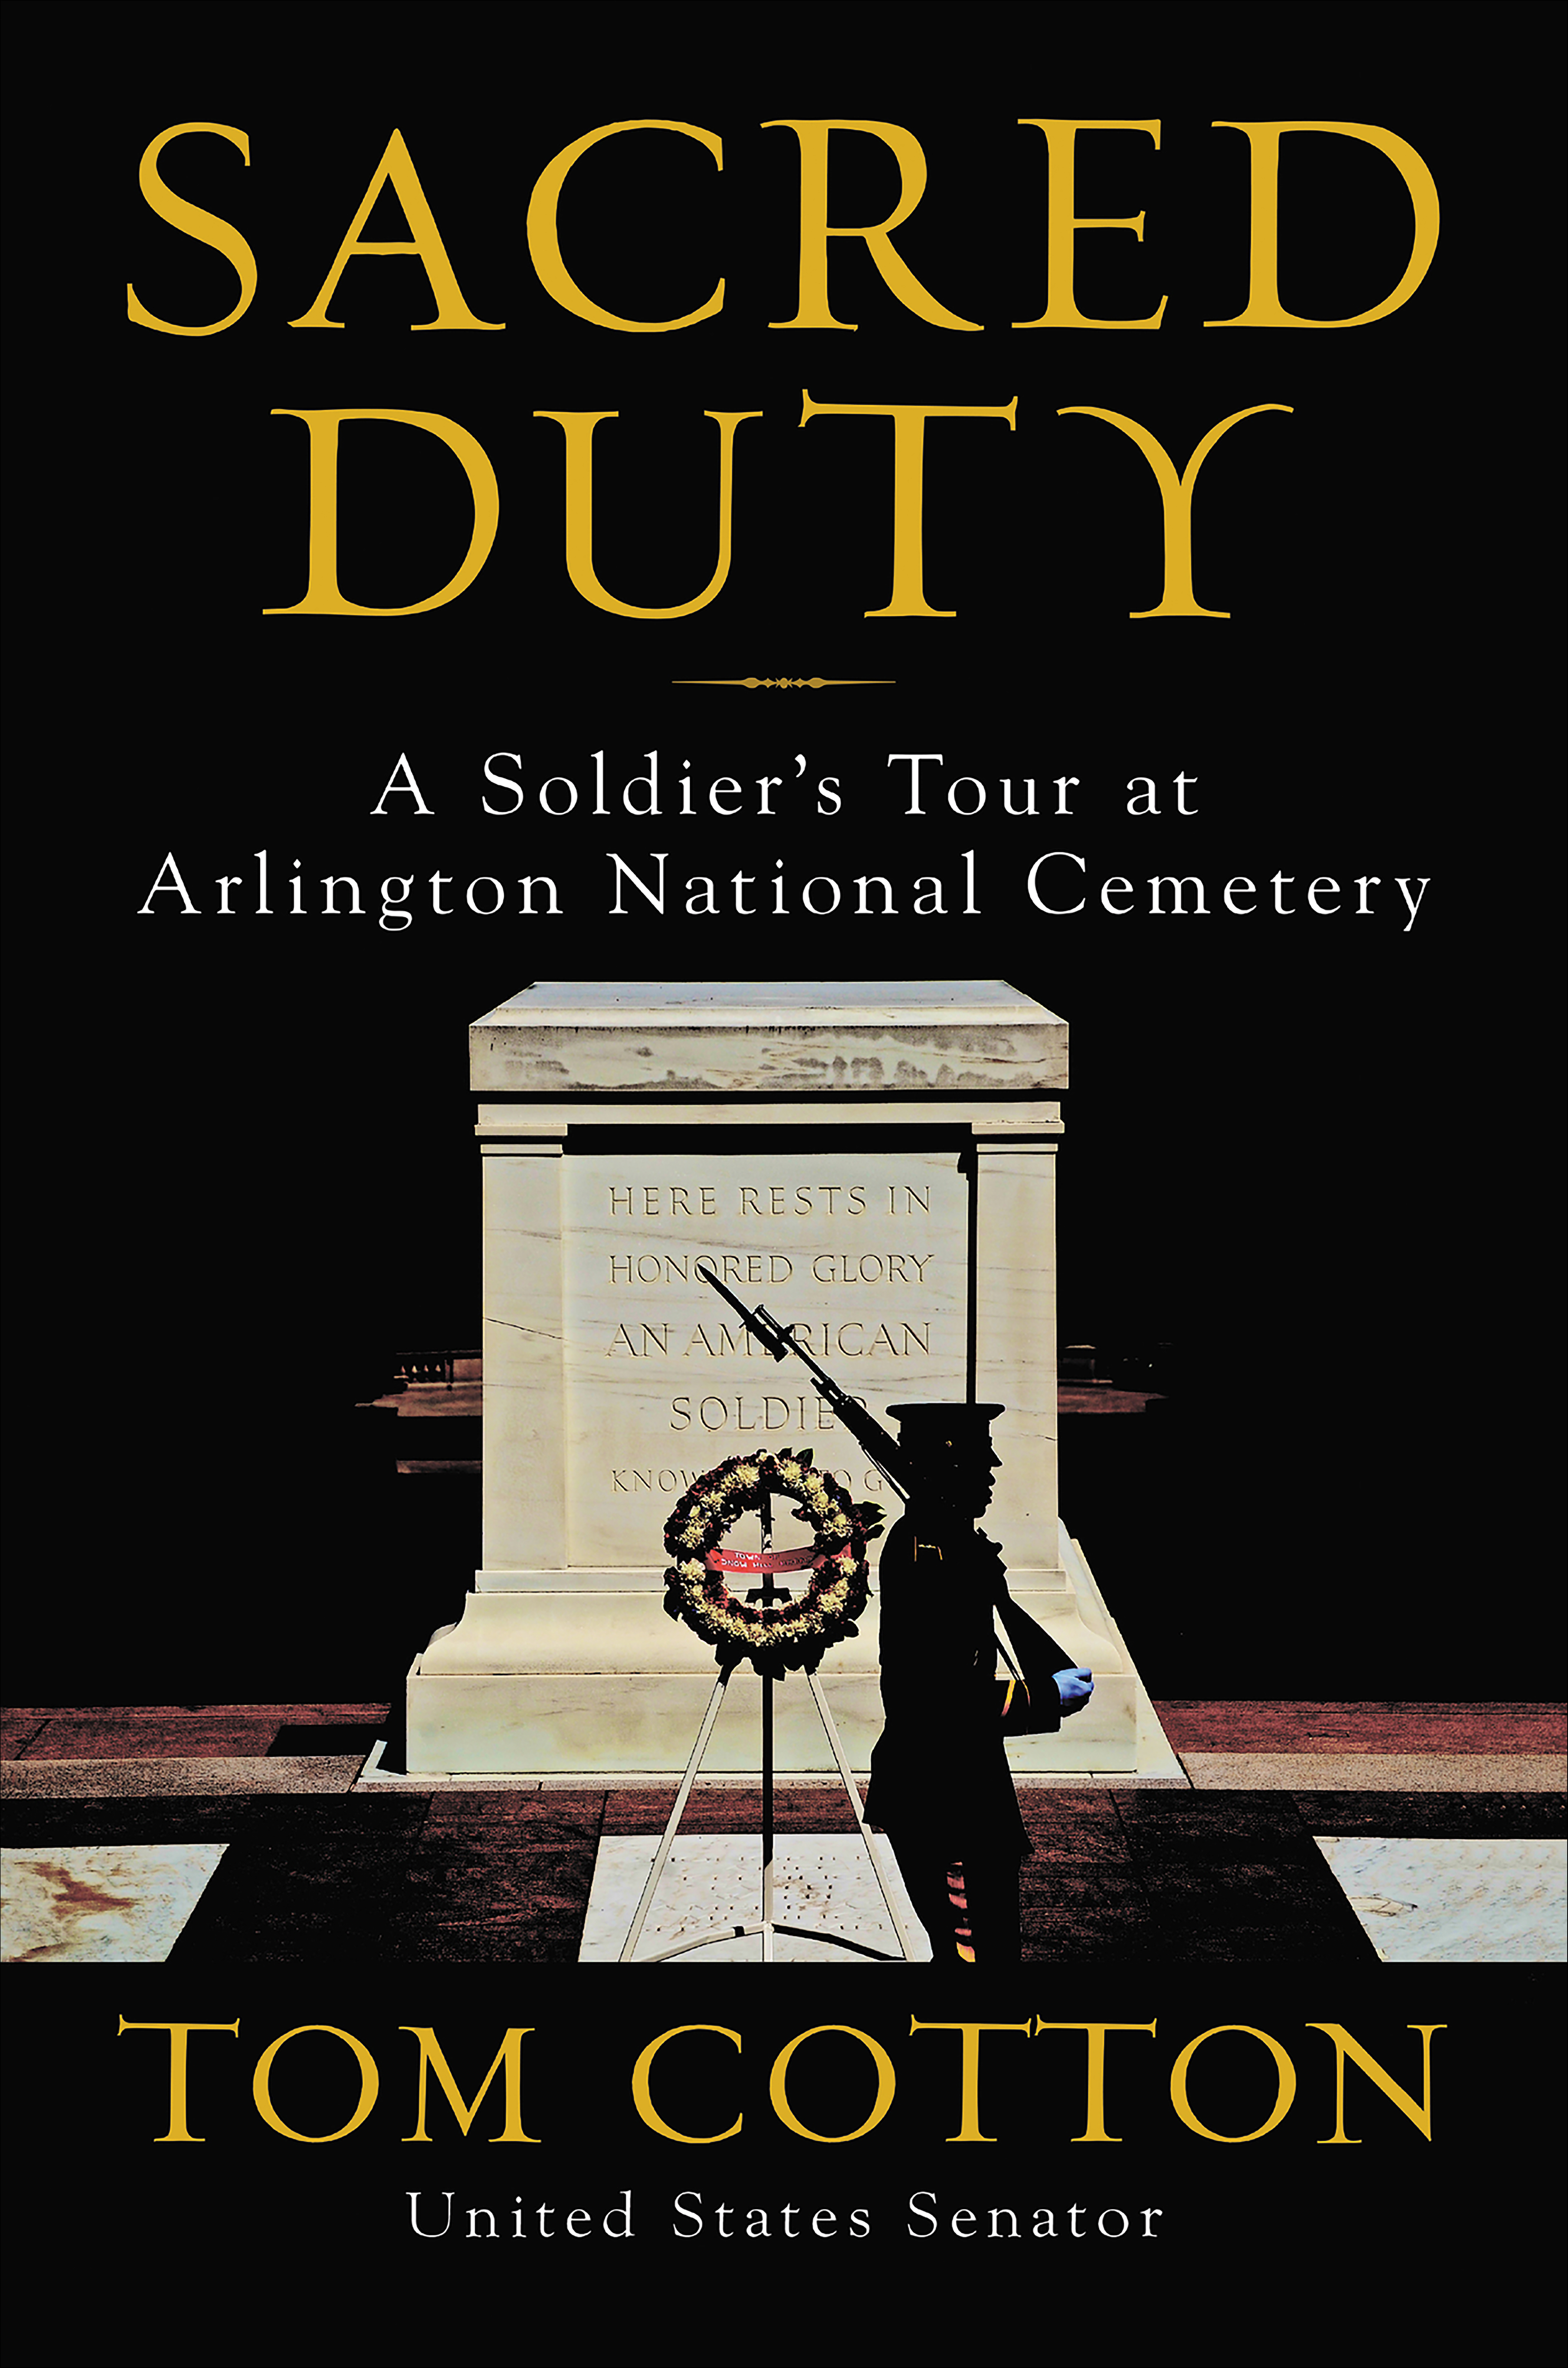 Sacred duty a soldier's tour at Arlington National Cemetery cover image